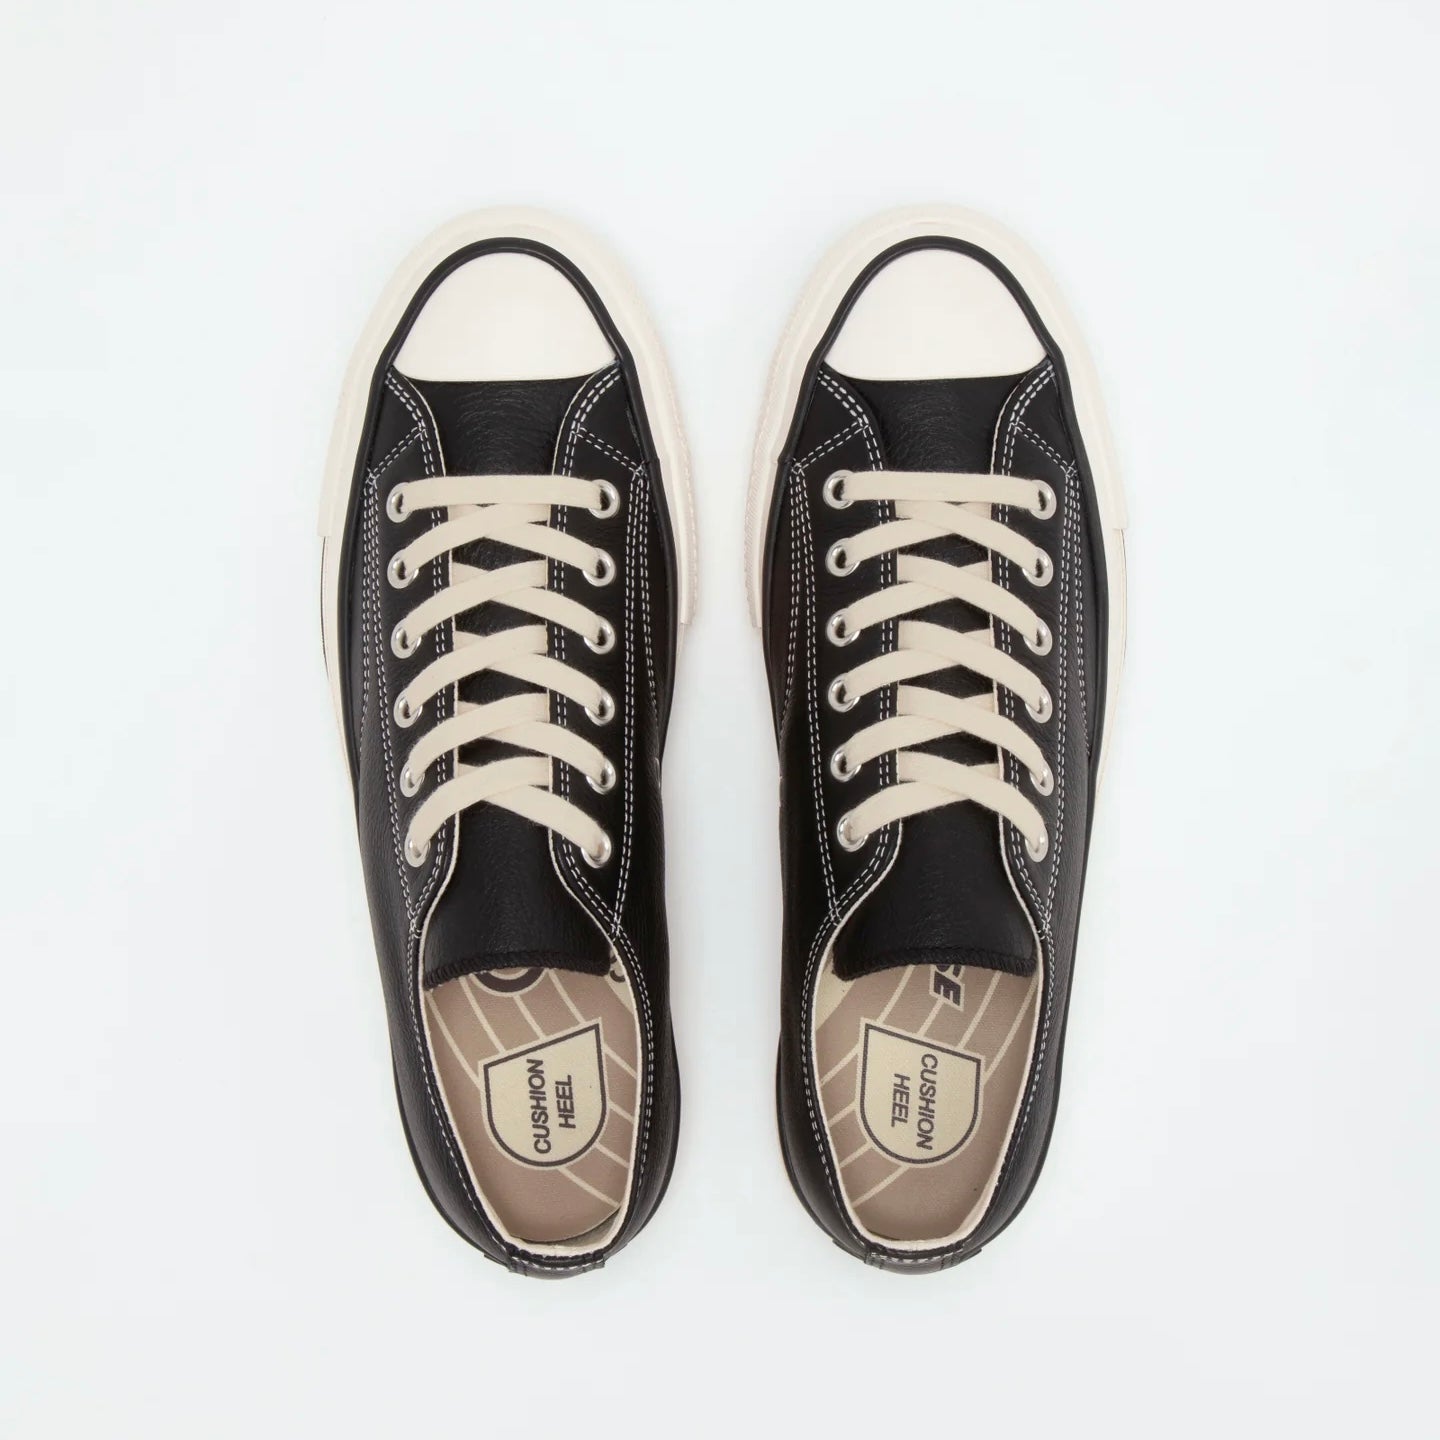 CHUCK TAYLOR LEATHER OX - BLK